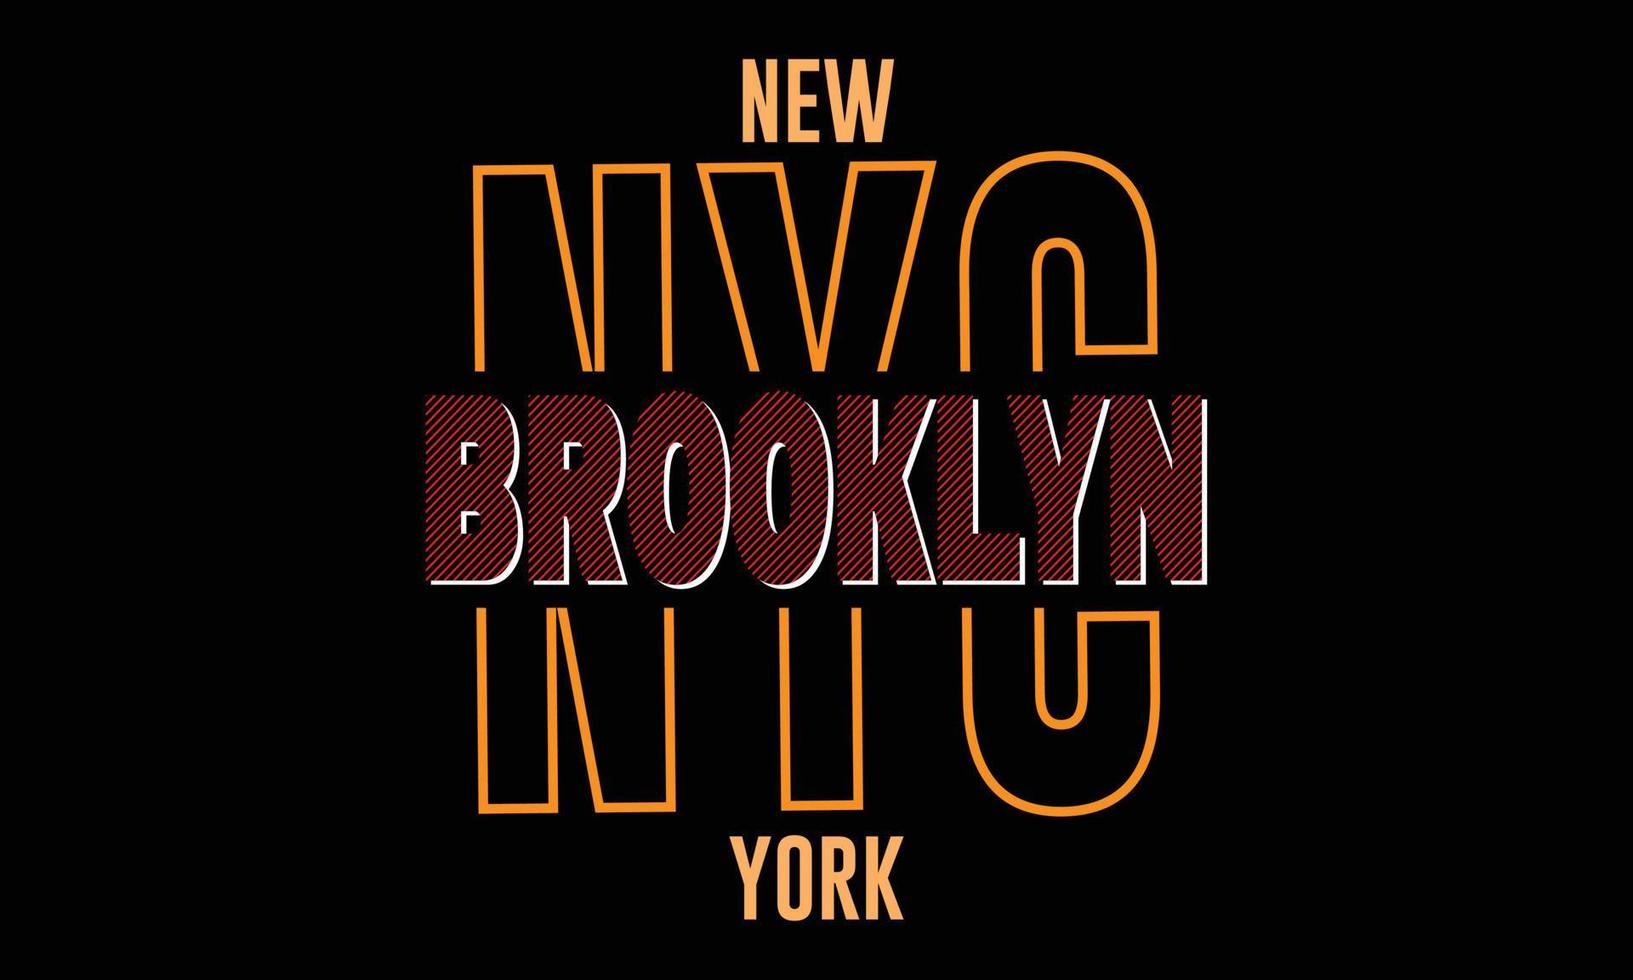 New York Brooklyn T-shirt Design illustration and colorful design vector